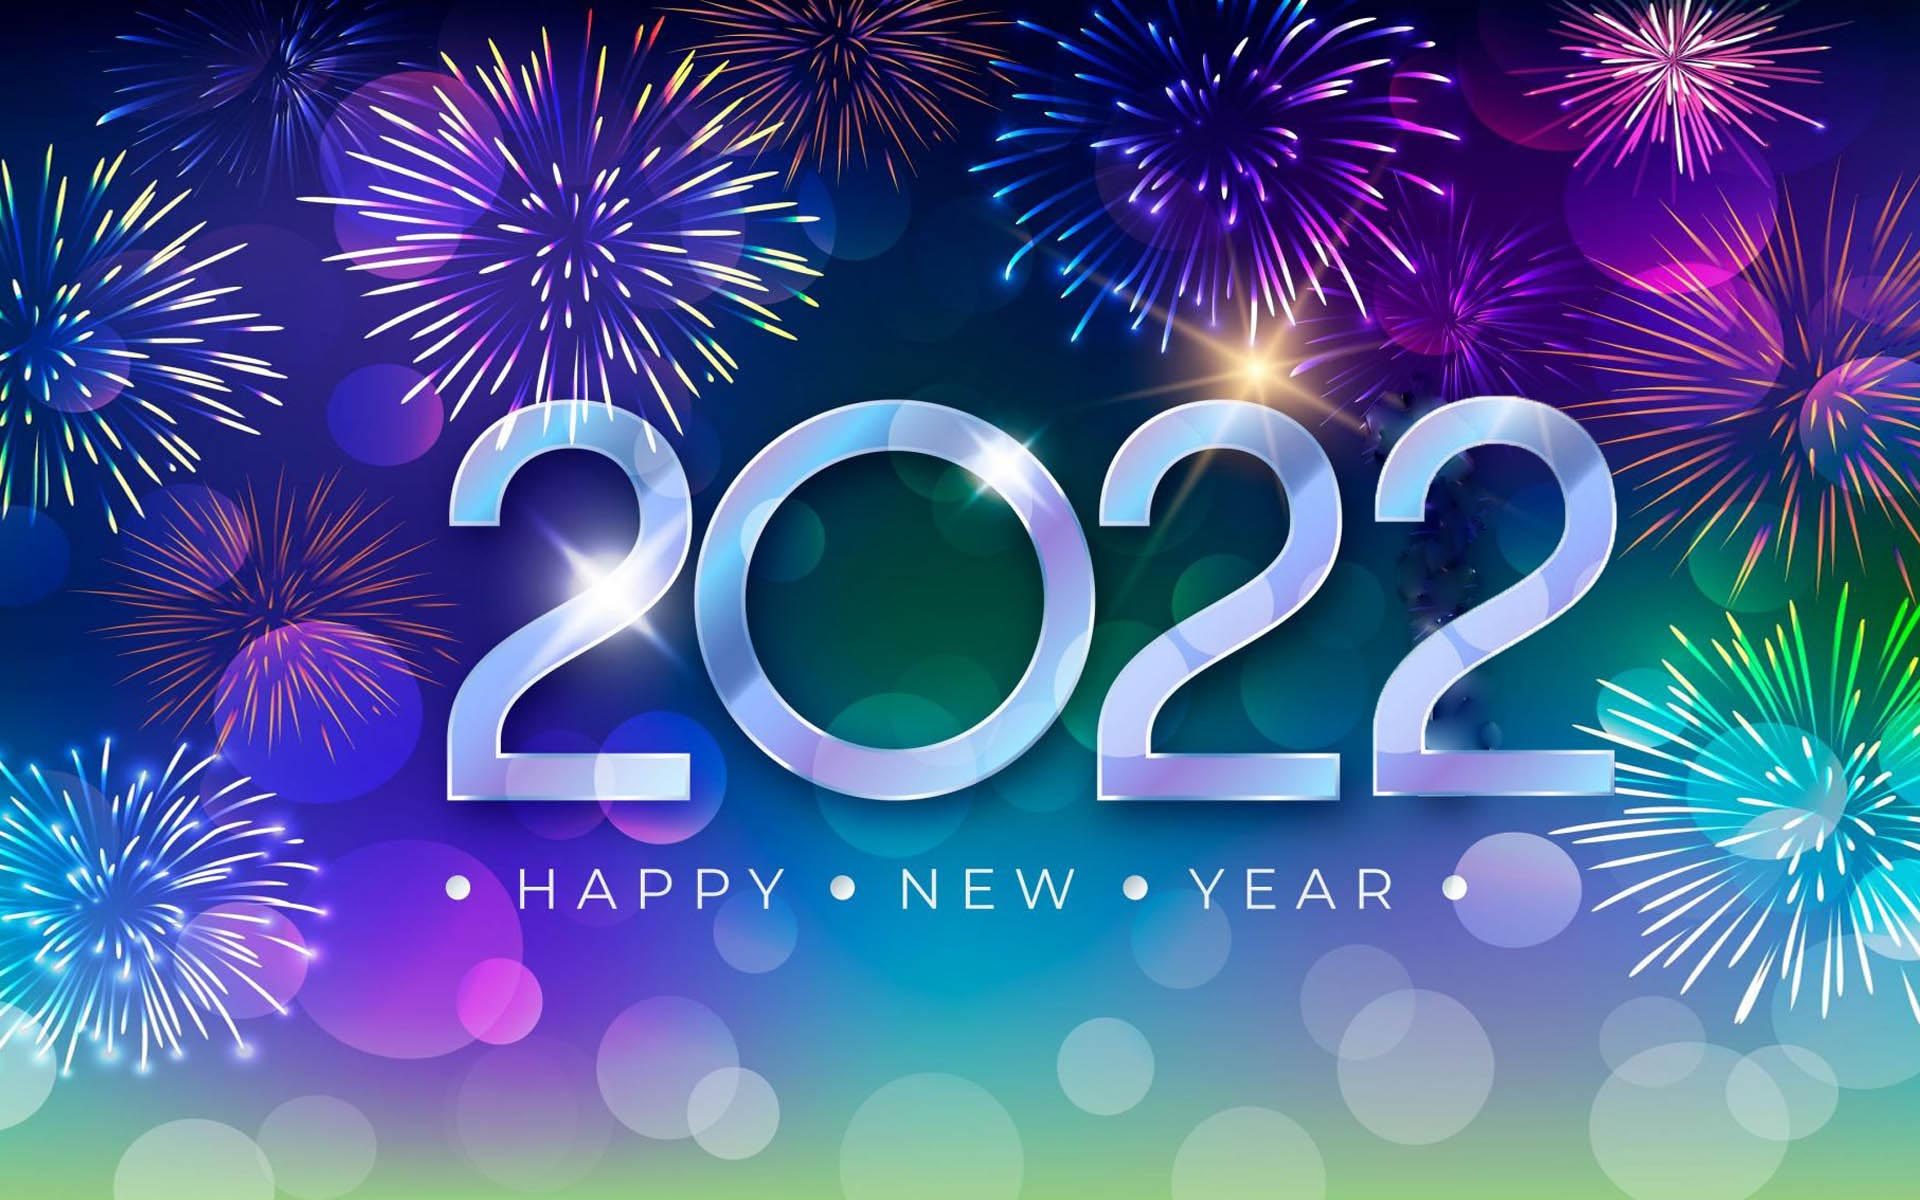 Happy New Year 2022 Blue Hd Wallpaper For Laptop And Tablet Free